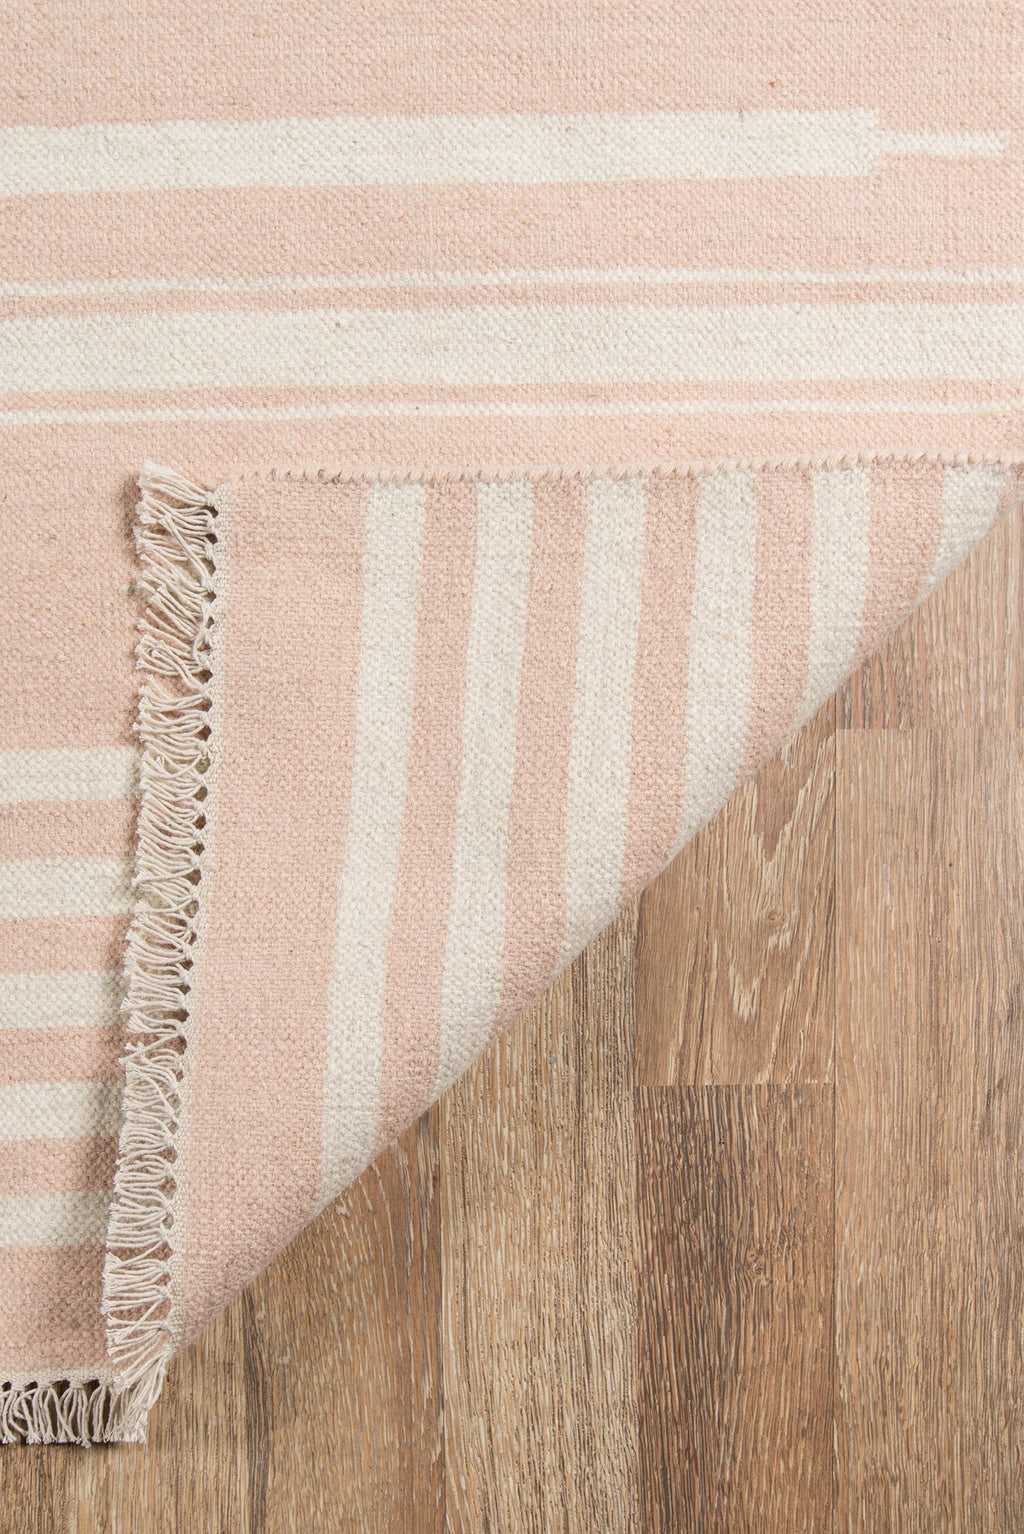 Momeni Thompson Billings Pink Area Rug by Erin Gates Room Image Feature